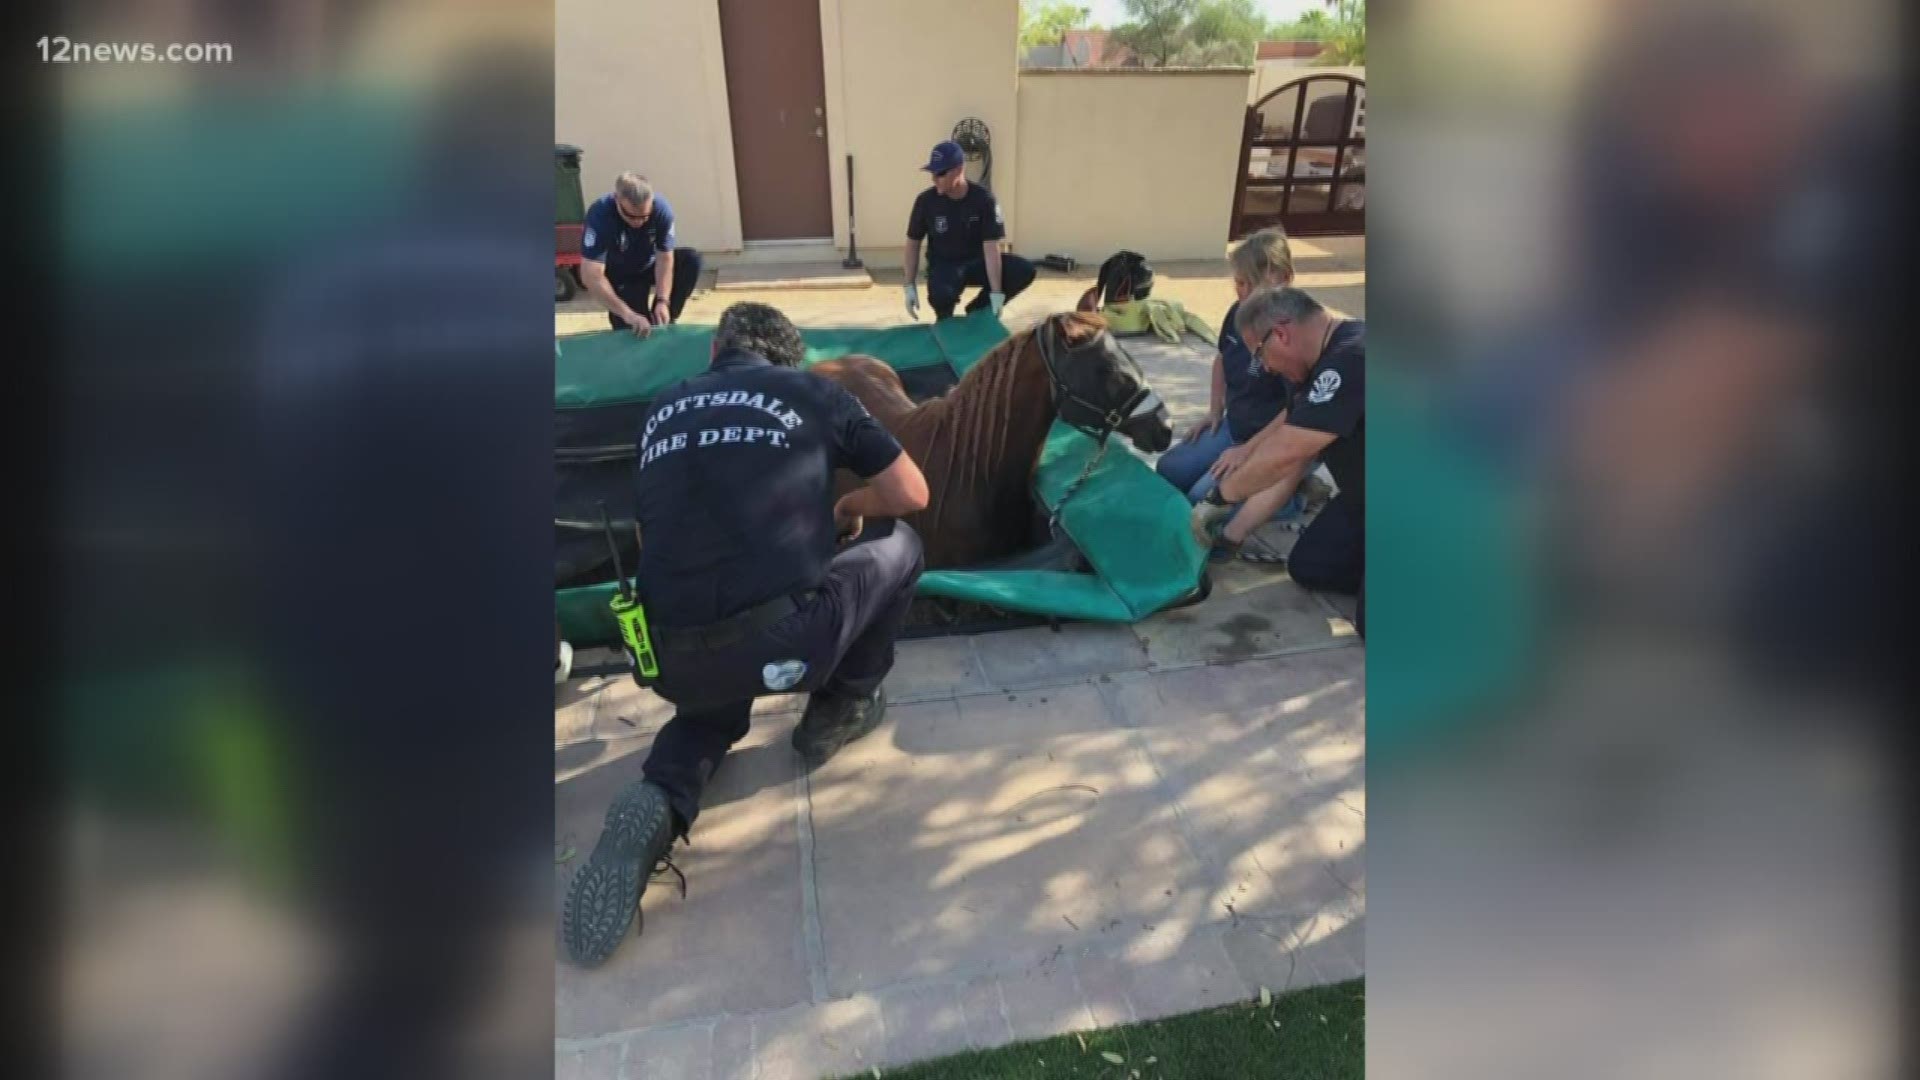 A horse found itself in quite the predicament after falling into an in-ground trampoline pit. Unable to escape, the horse was stuck. Thankfully, the Scottsdale Fire Department was there to help.